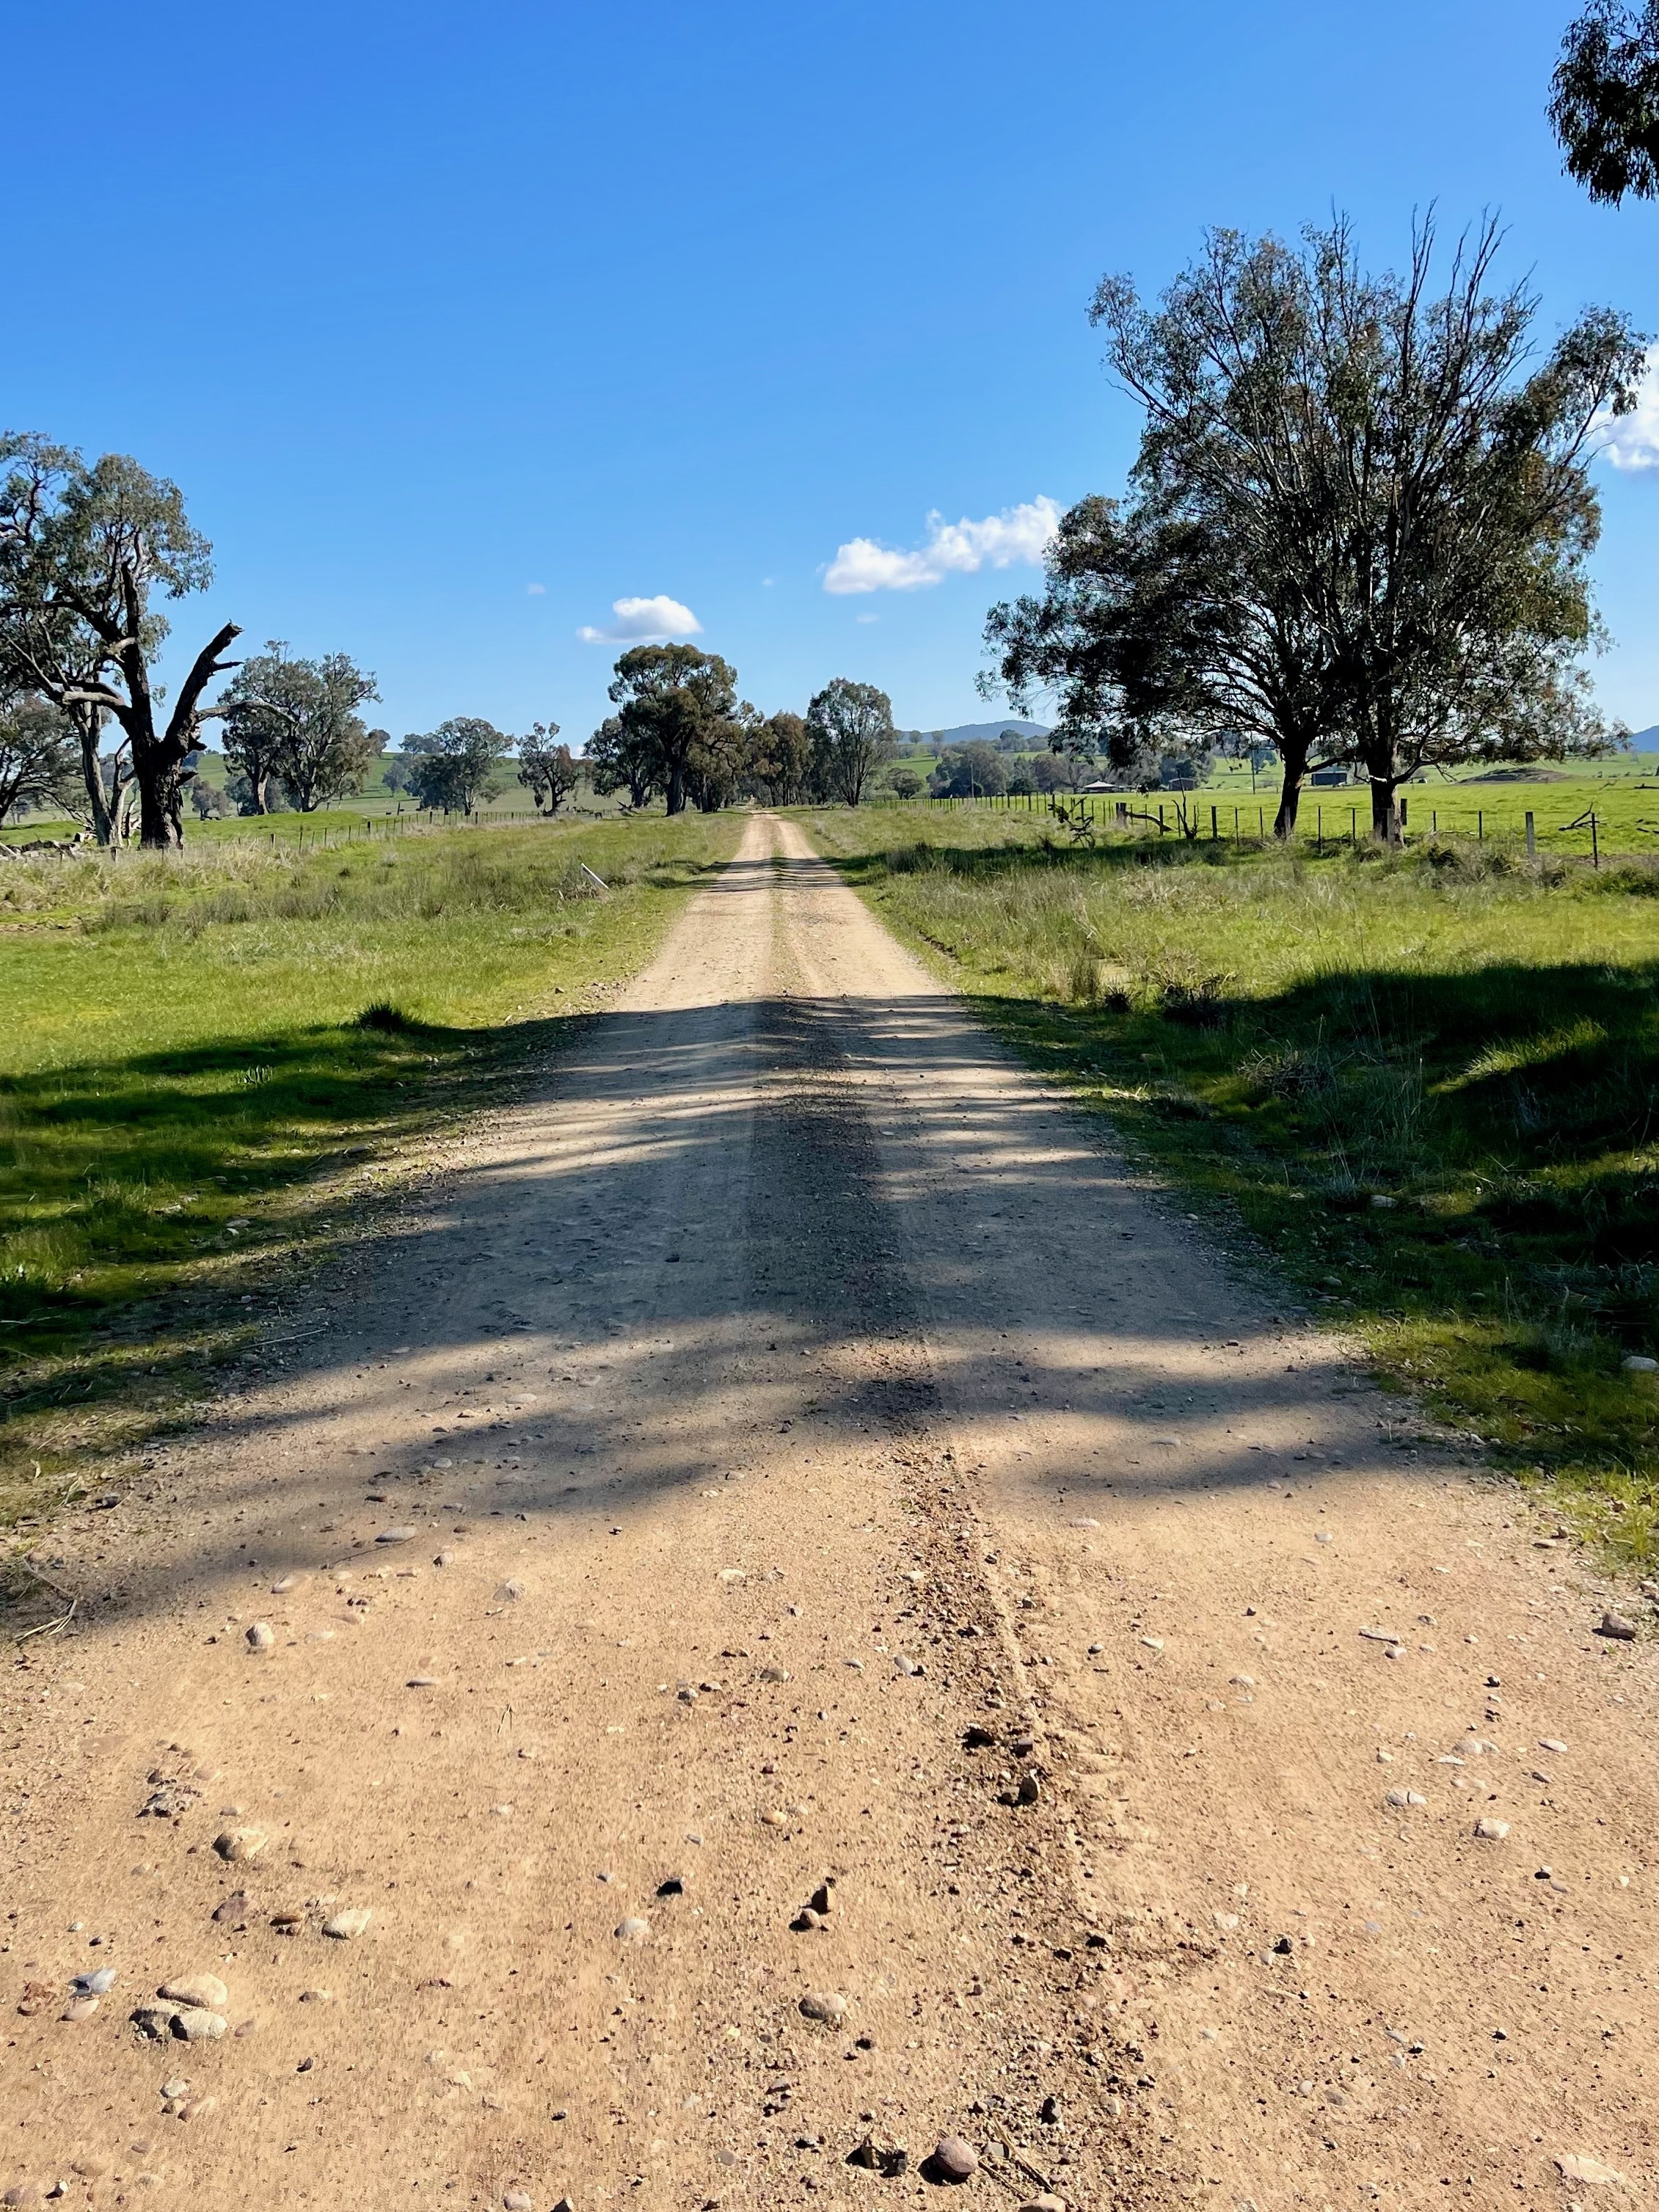 Gravel road cutting from open farmland with trees lining gravel road in the distance